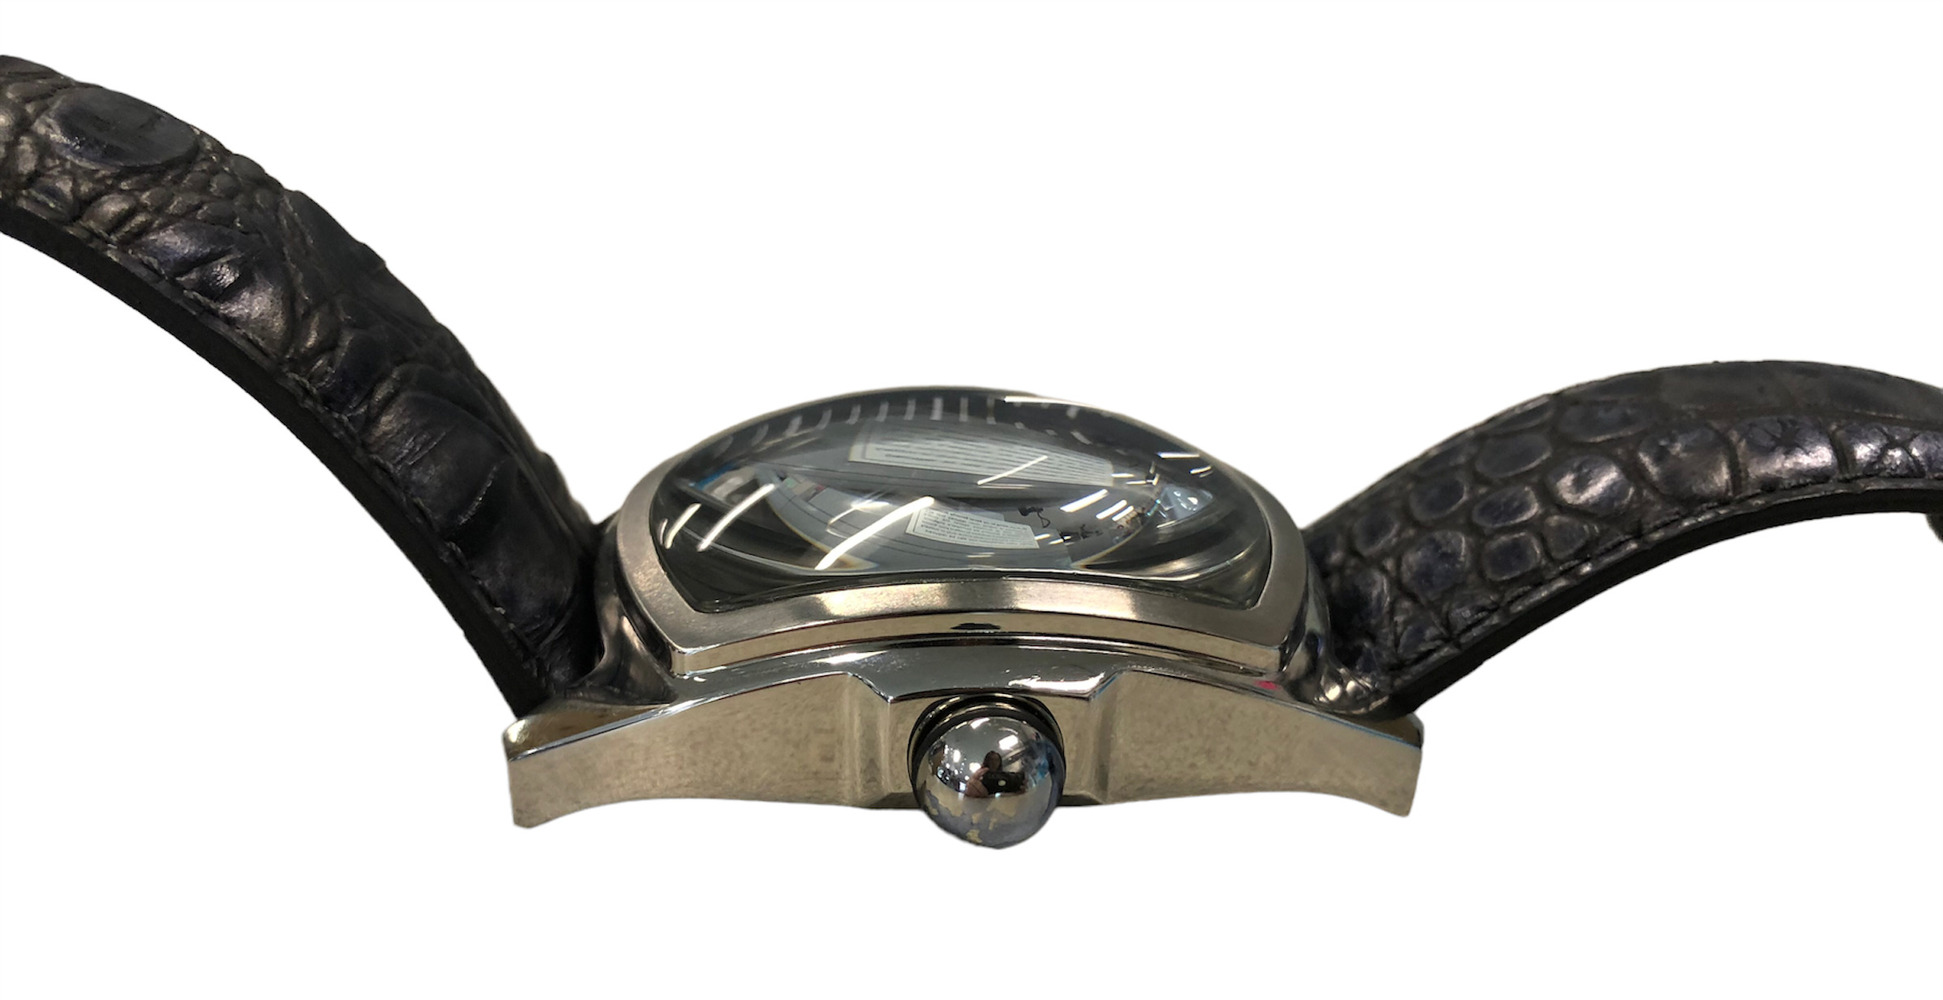  Invicta Lupah Dragon Black Mother of Pearl Dial Stainless Steel Men's Watch